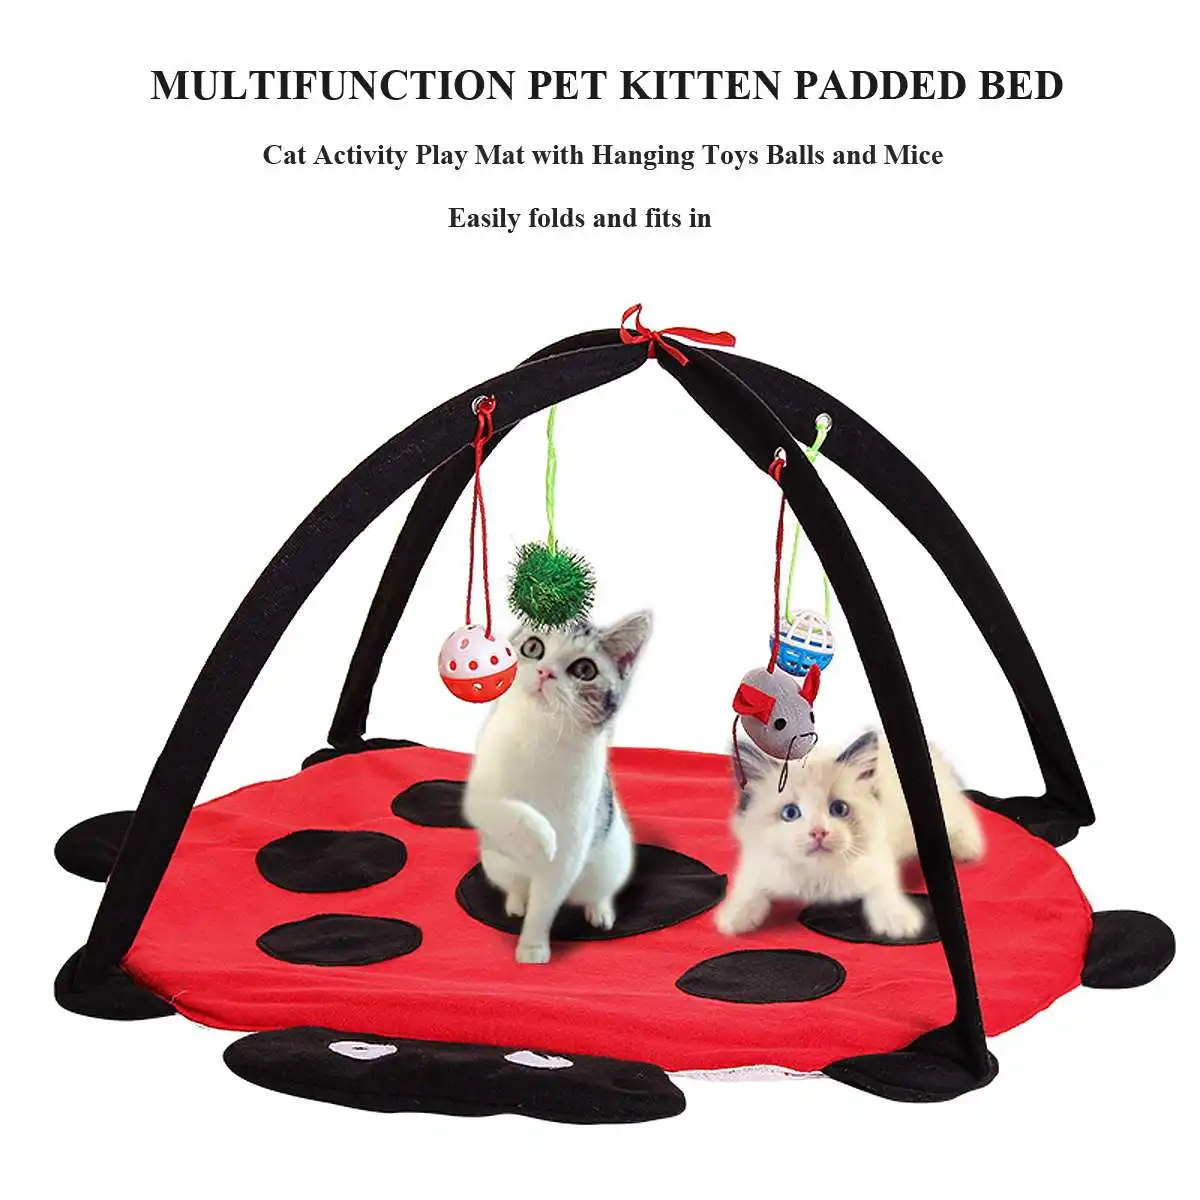 

Funny Cat Tent Portable Cat Toys Cat Tent Pets Play Bed Toys Cat Play Mat Blanket House Foldable Kitty Tents Cat Beds & Mats